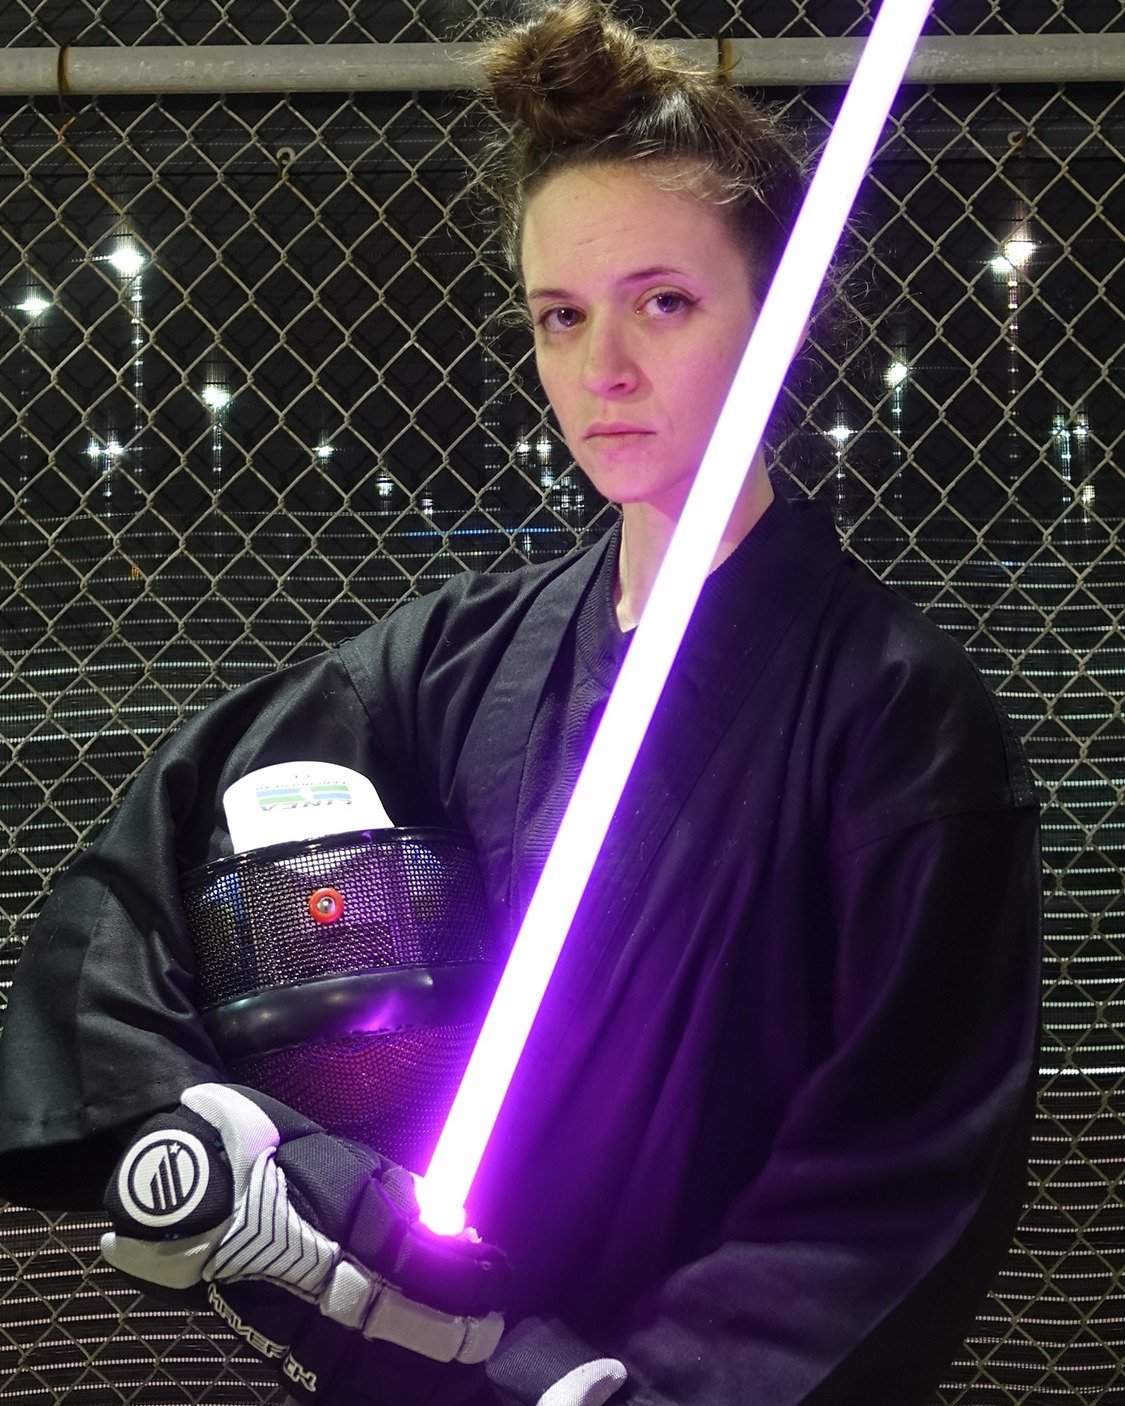 No class tonight on account of mom's day. Here's a haughty pic of @synaesthetic__ instead. See you Tuesday!

#ladyjedi